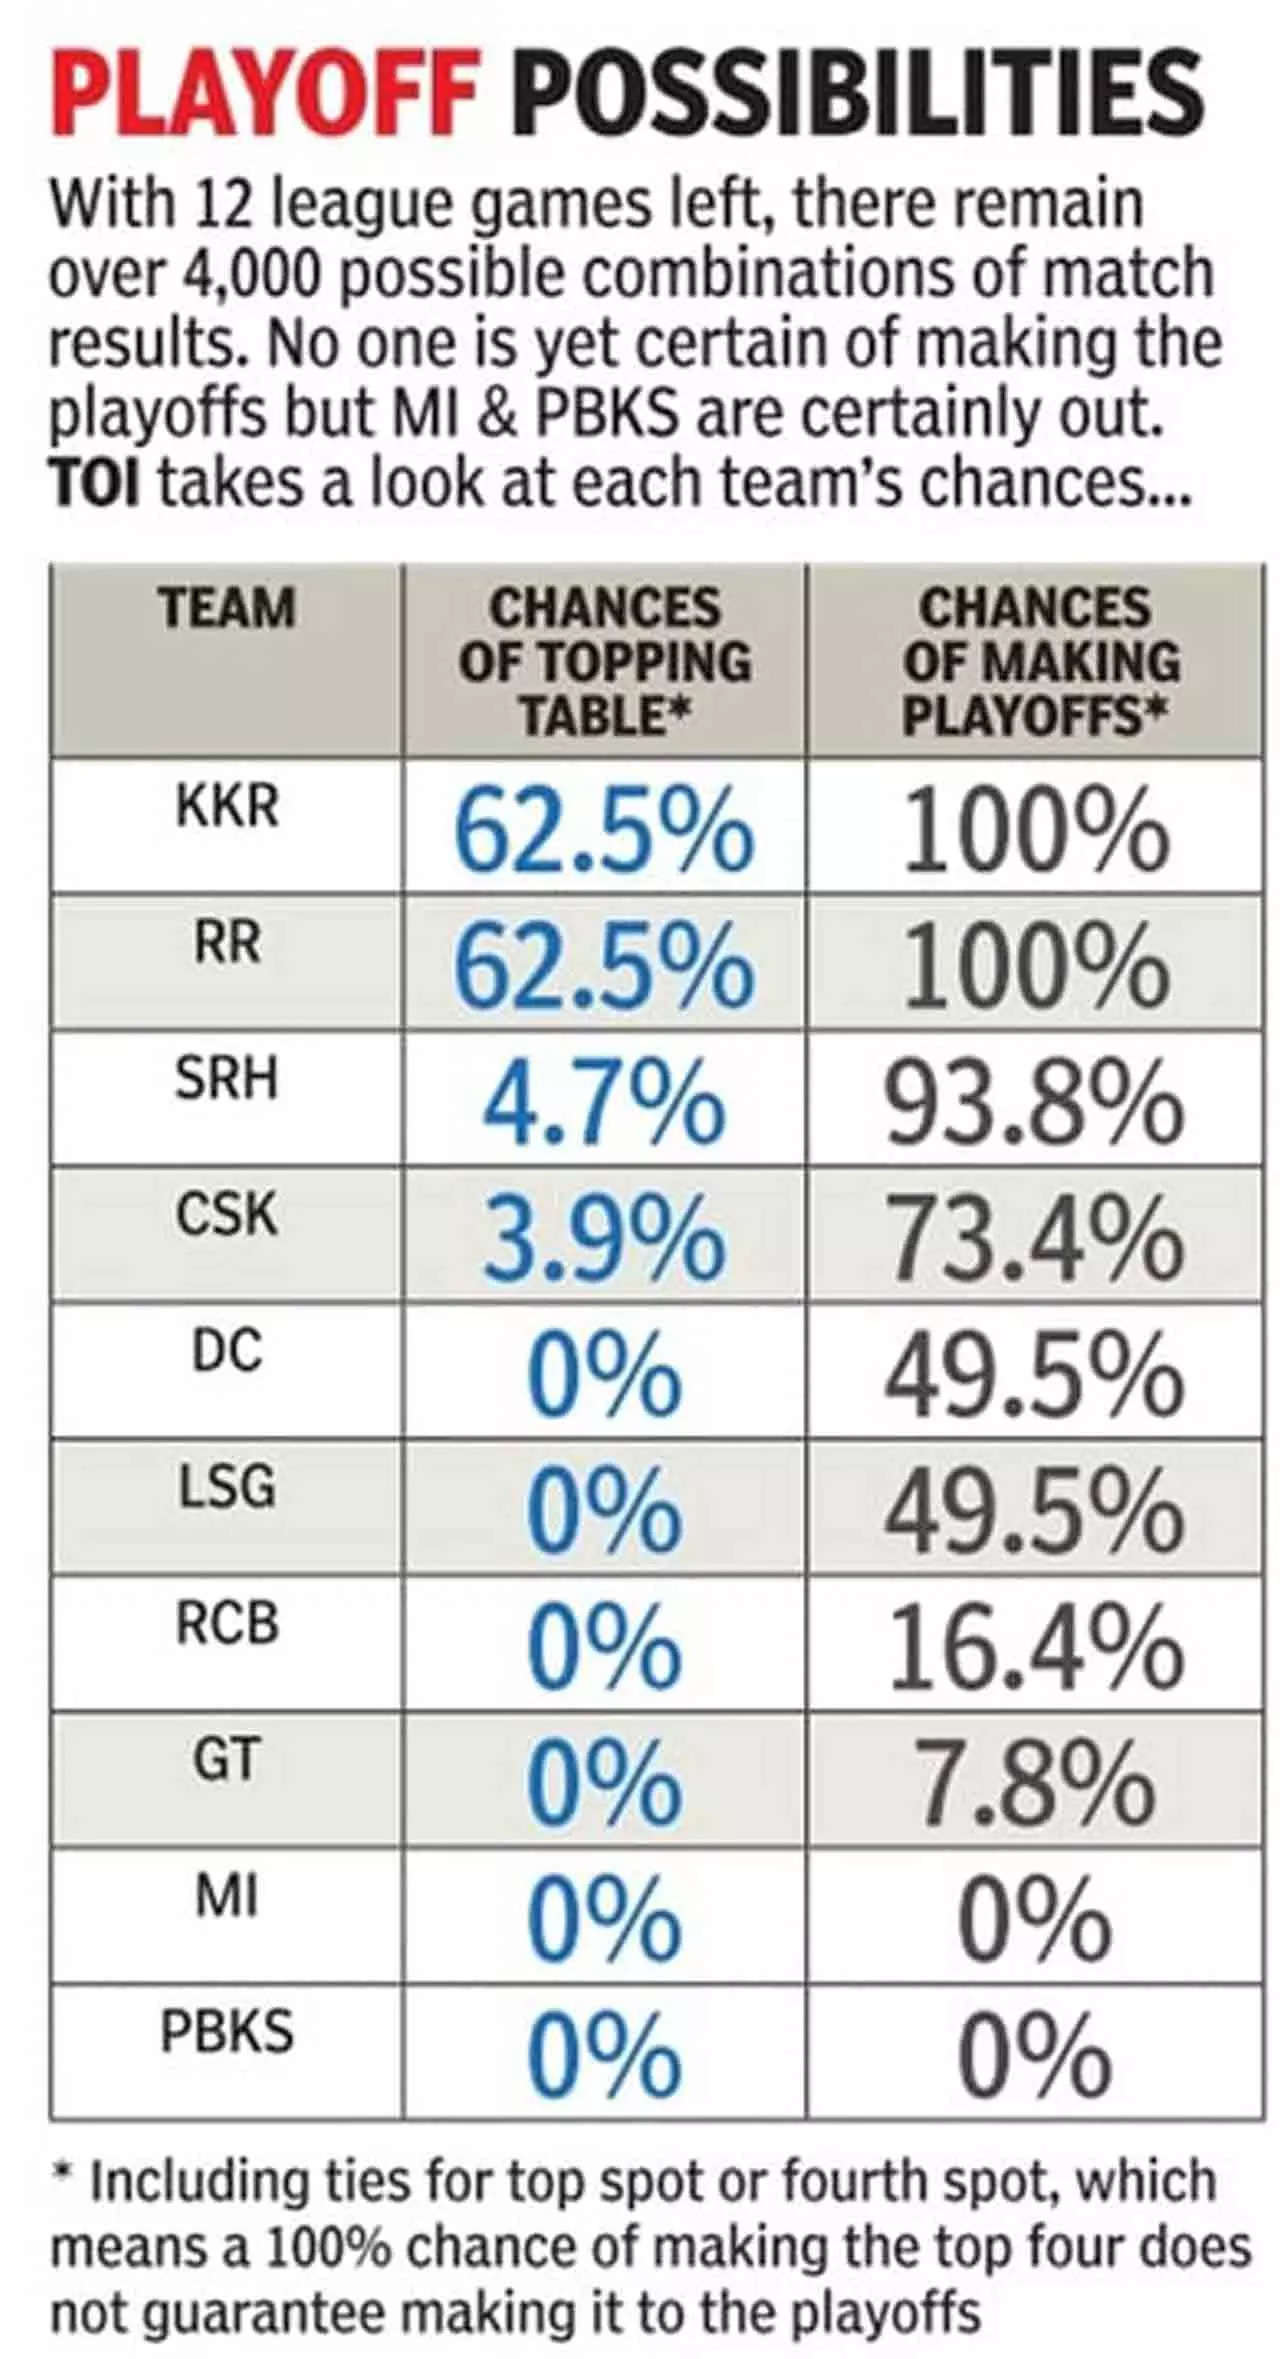 rcb stay alive, punjab kings knocked out: all ipl playoff scenarios in 10 points